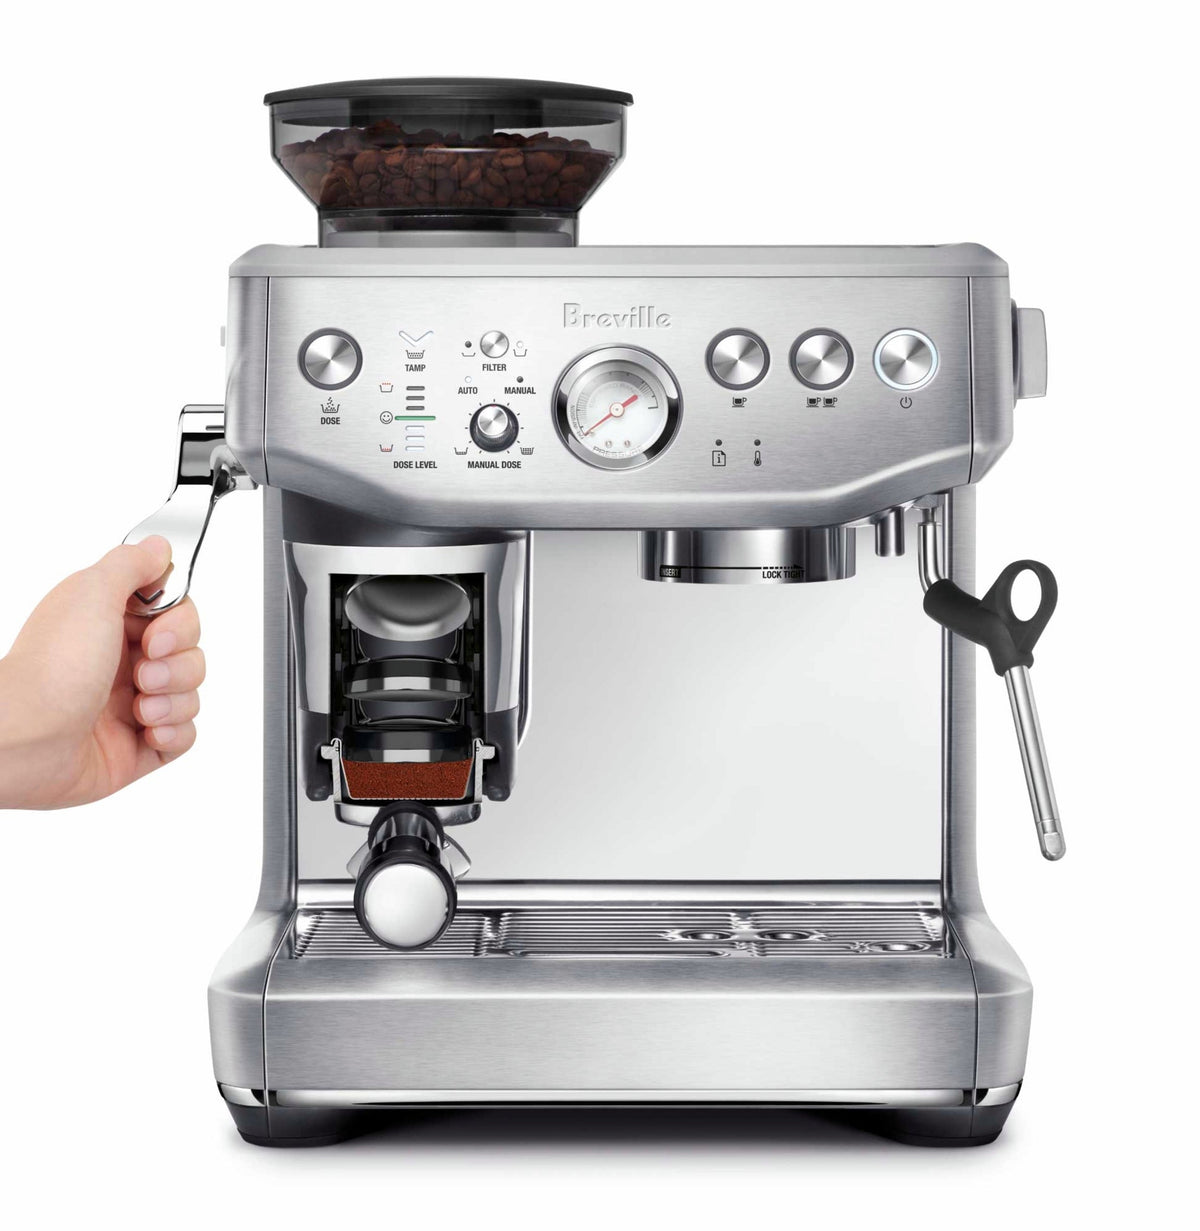 Breville Barista Express Impress Brushed Stainless Steel BES876 Tamping Graphic